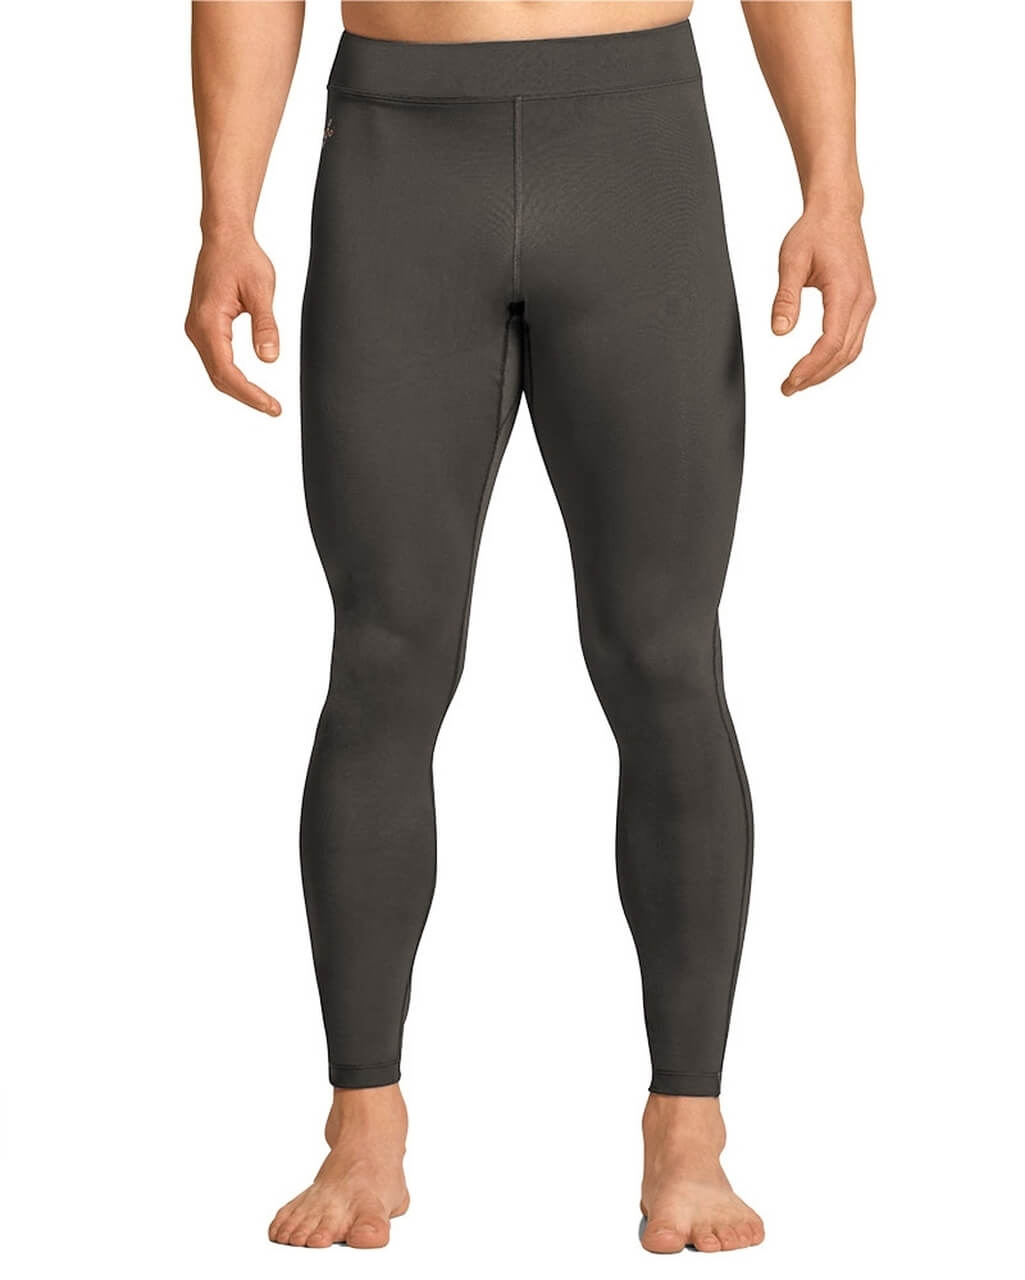 Queerier Mens Compression Pants Active Athletic Leggings with